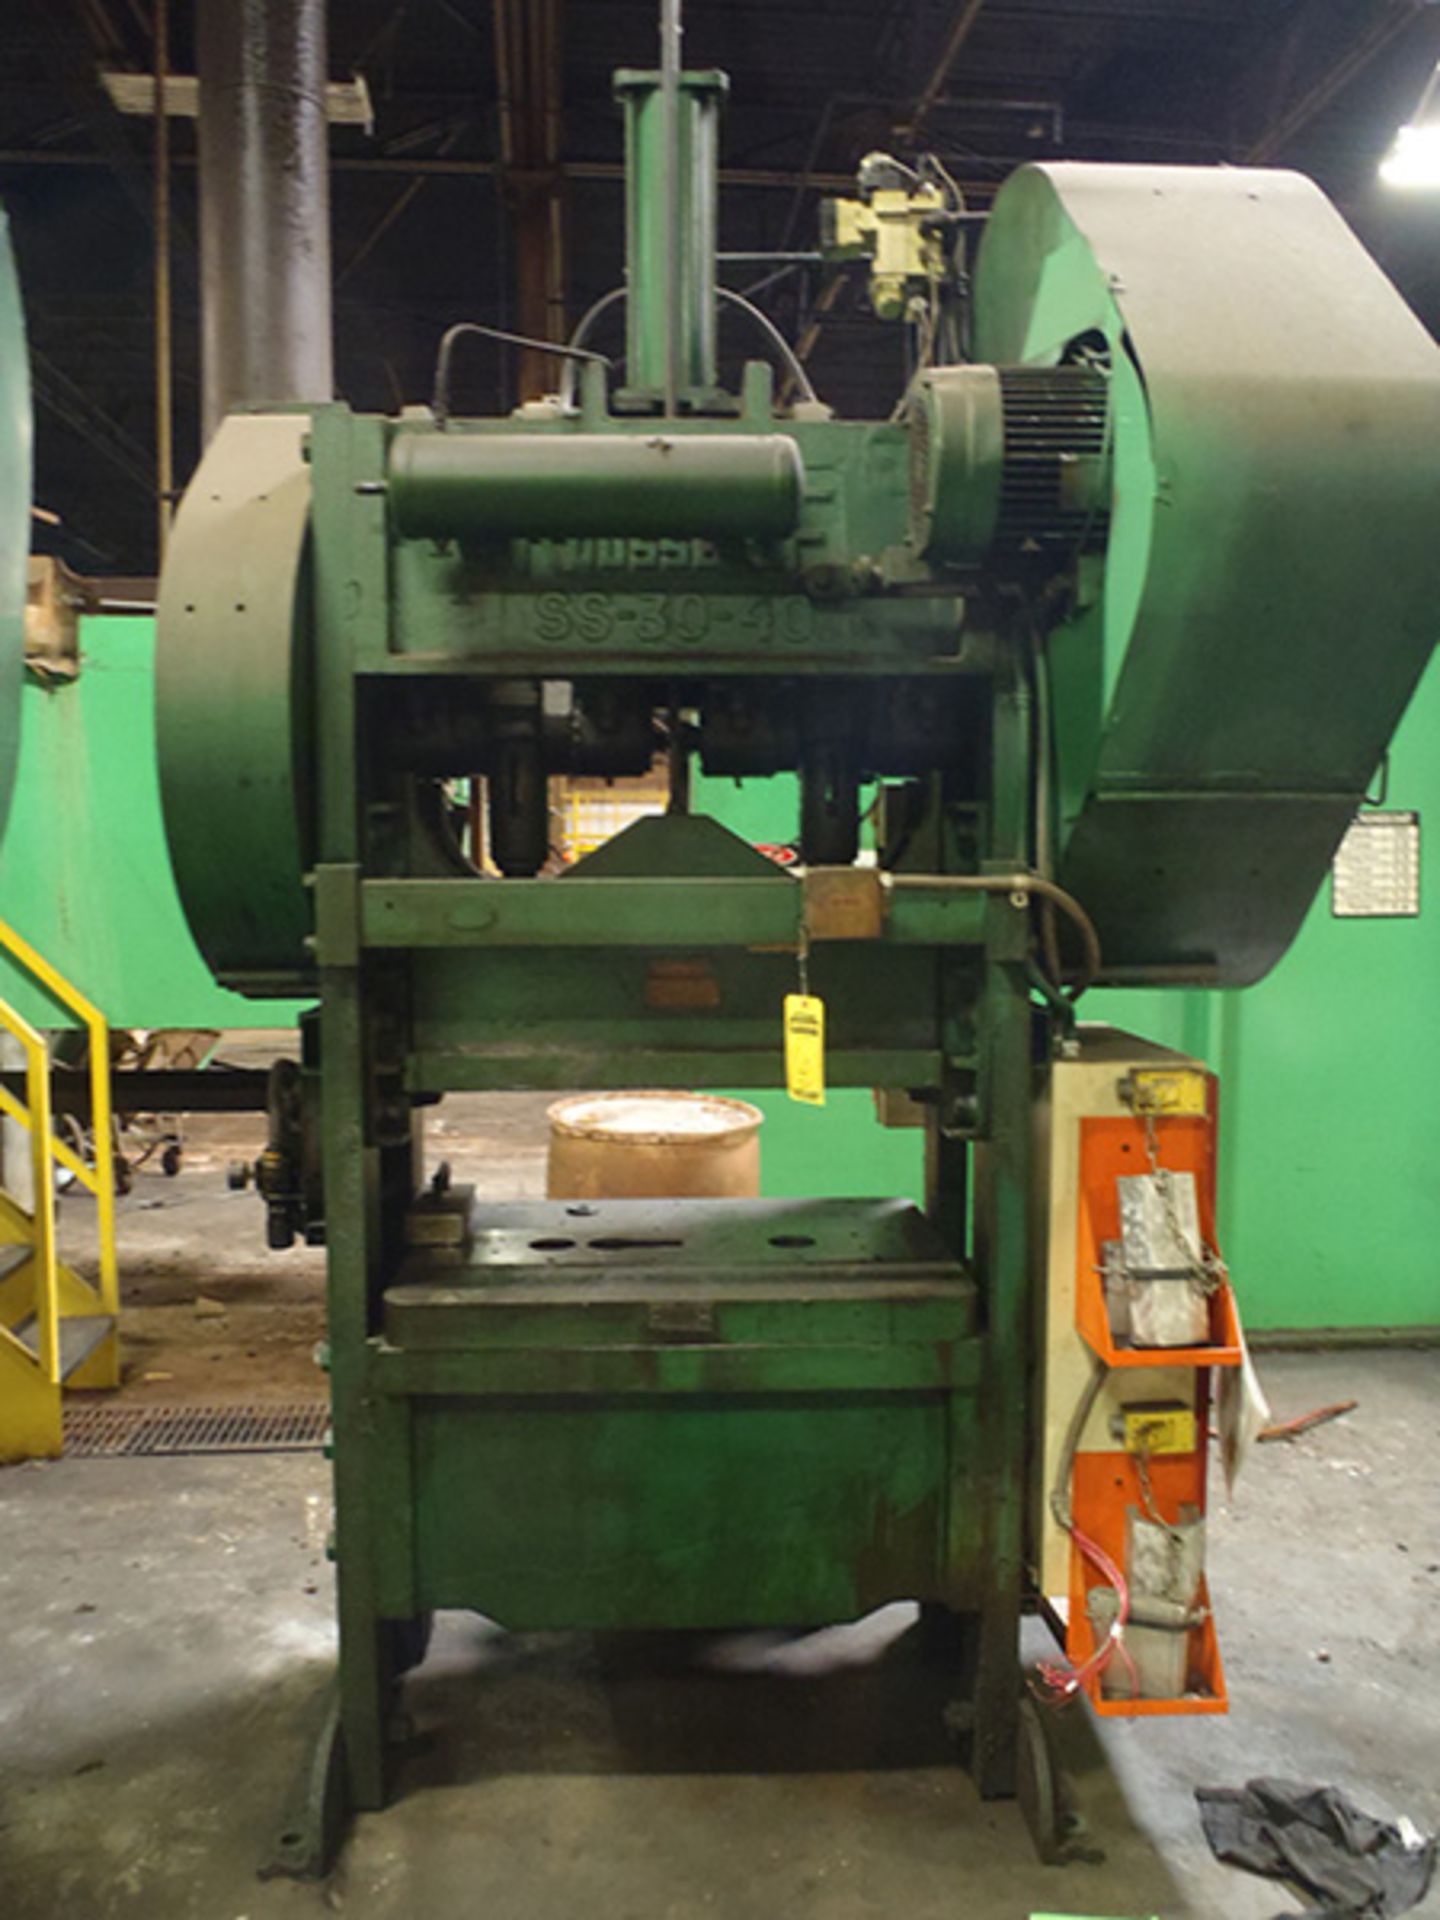 ROUSSELLE 100-TON PUNCH PRESS, MODEL 10S40, S/N 20108 (RIGGING FEE $700.)